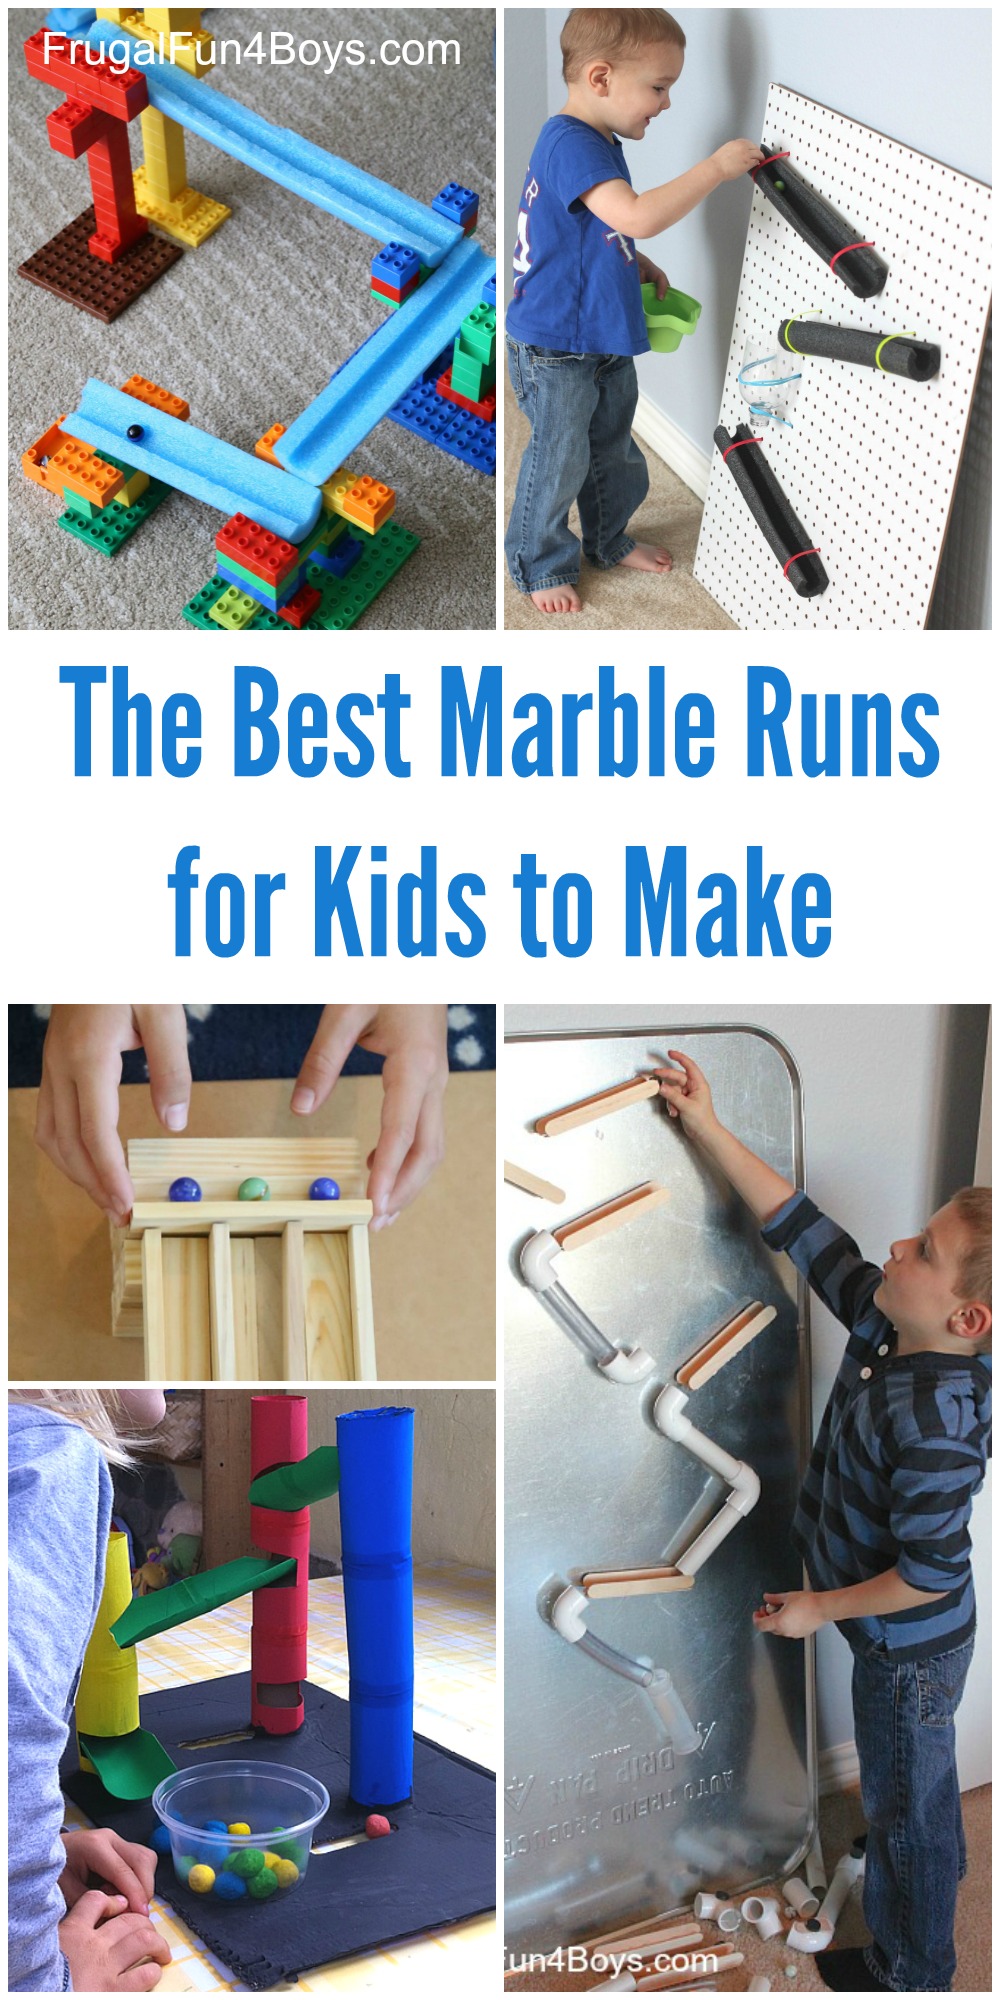 The BEST Marble Runs for Kids to Make! Fun ideas using materials from around the house. Recommendations on toy marble runs too.